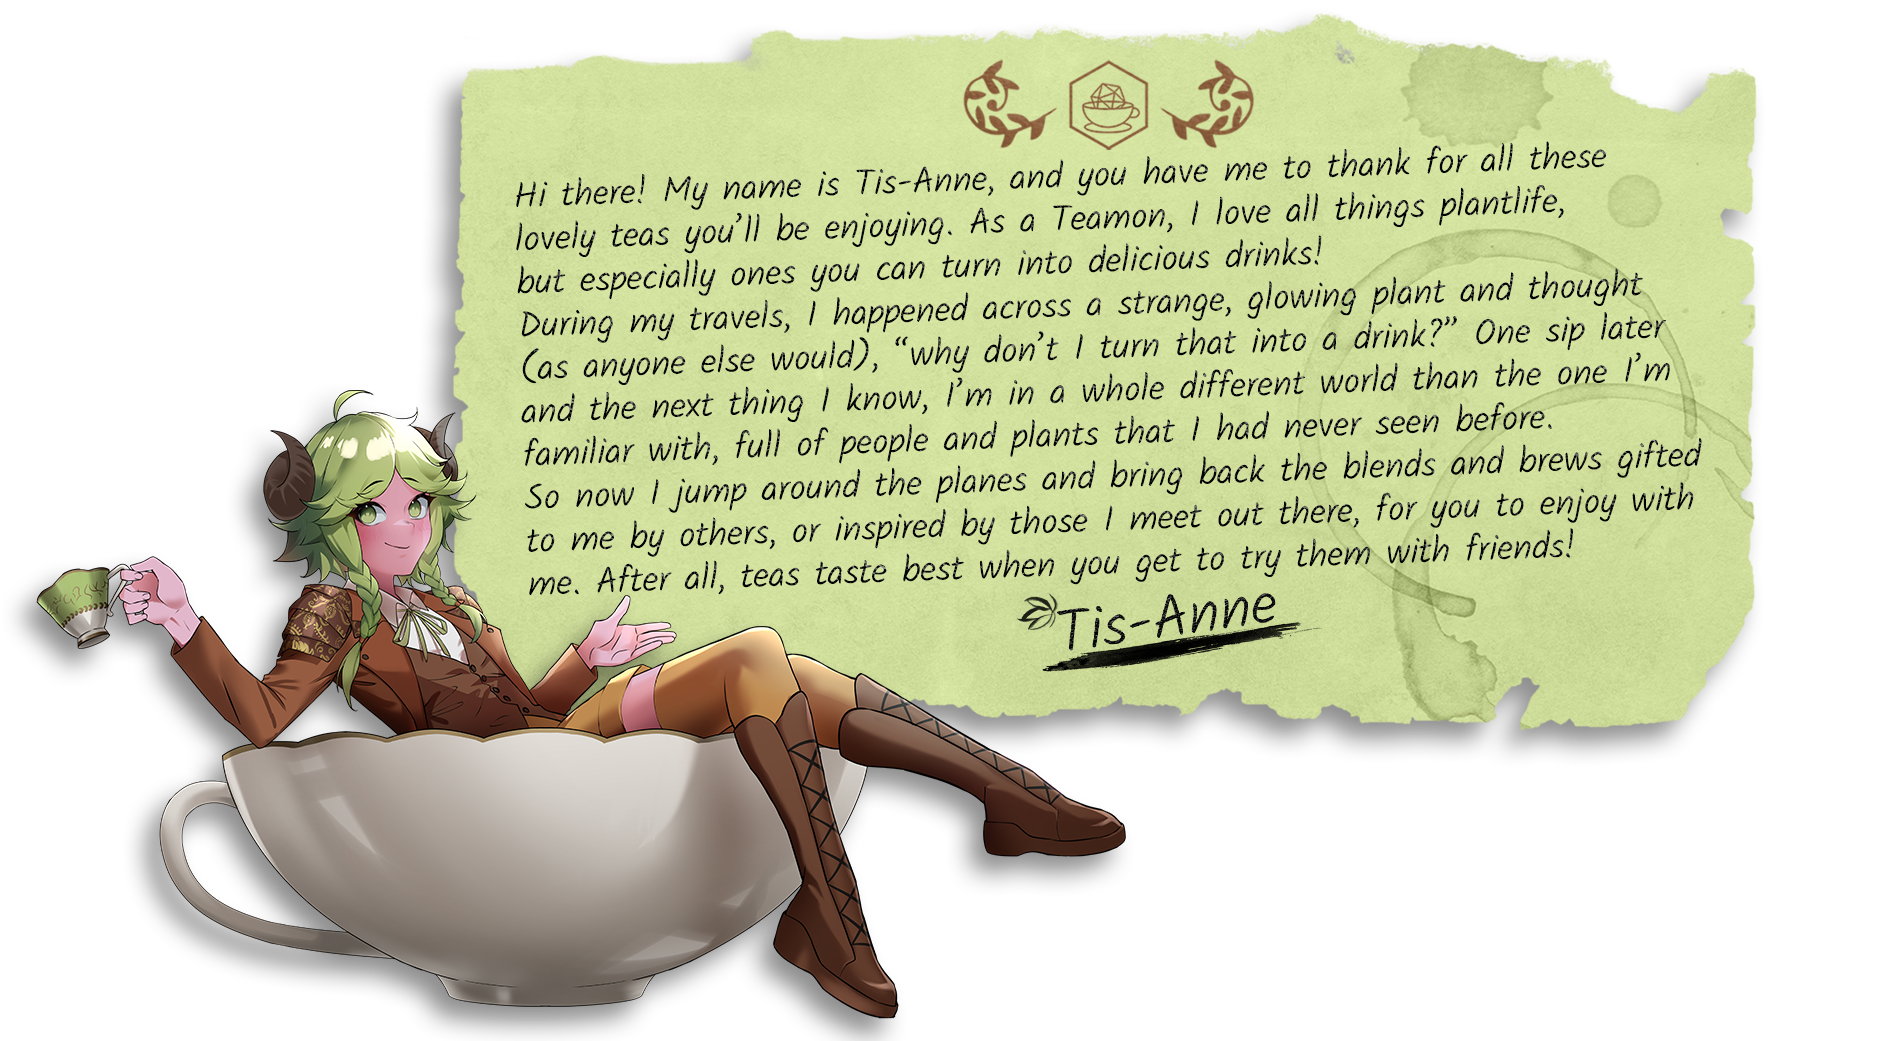 Tis-Anne, the company mascot, reclines in a teacup next to a paper message. The message explains that this character is responsible for travelling through dimensions to collect plants, turn them into teas and infusions, then sell them on this website.